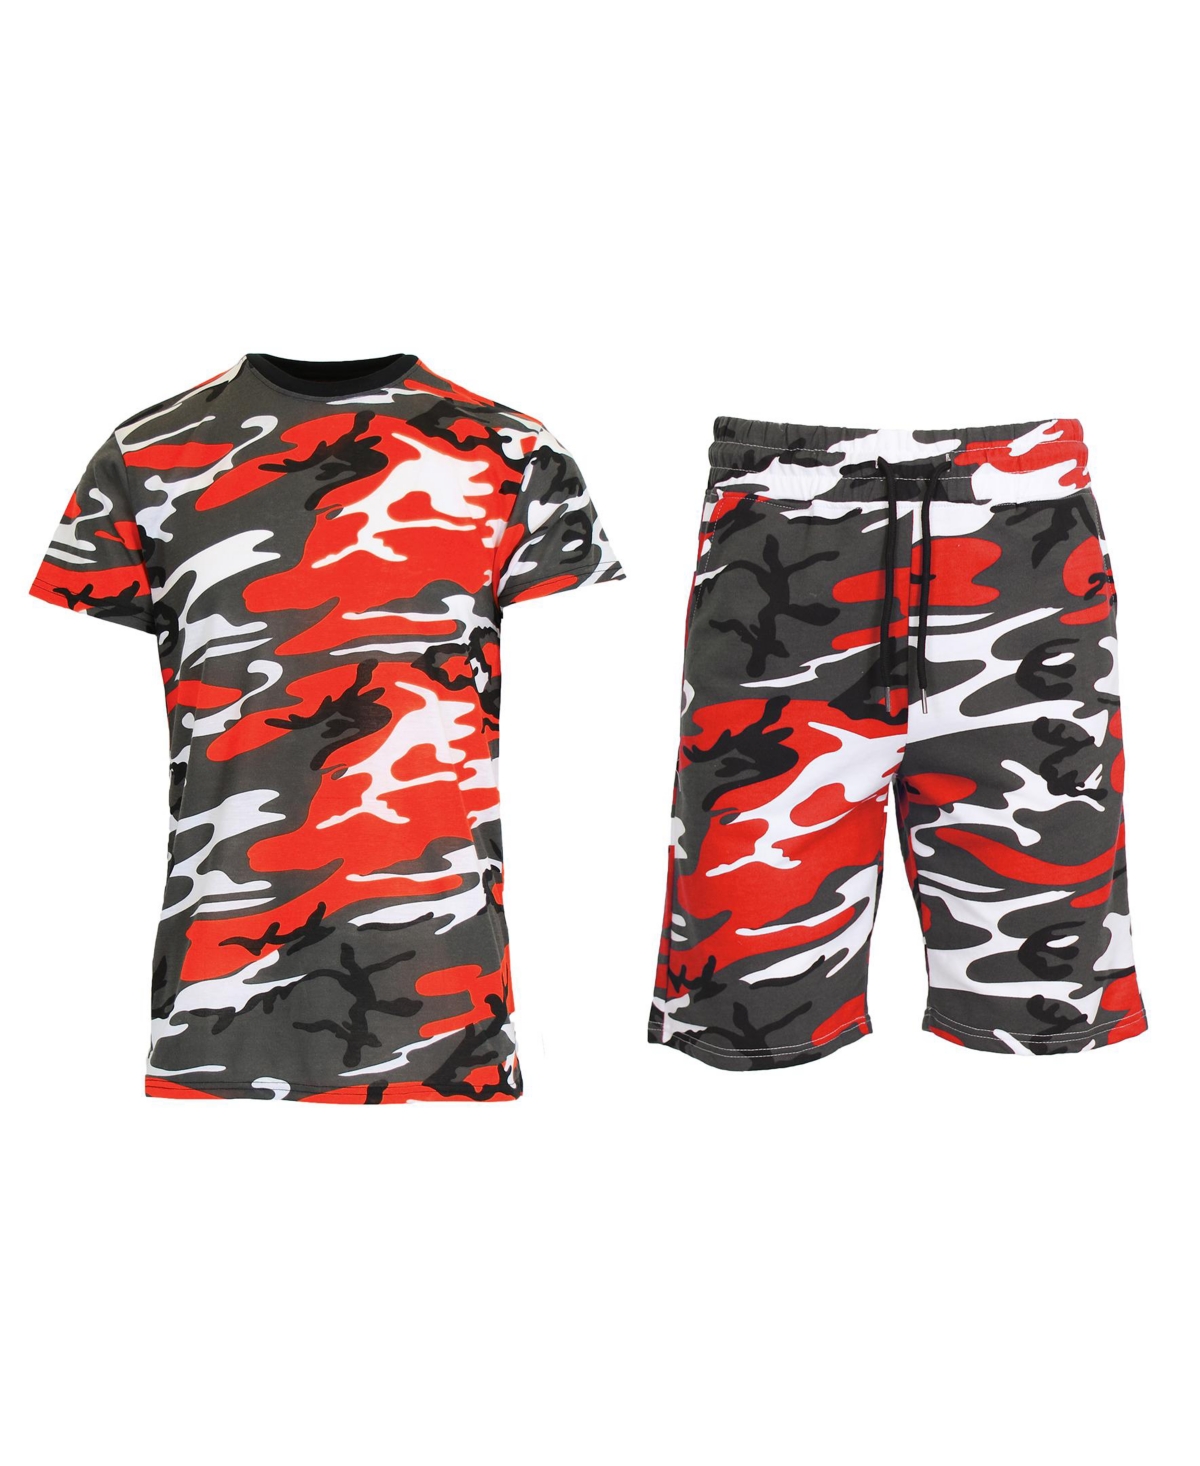 Galaxy By Harvic Men's Camo Short Sleeve T-shirt And Shorts, 2-piece Set In Red Camo